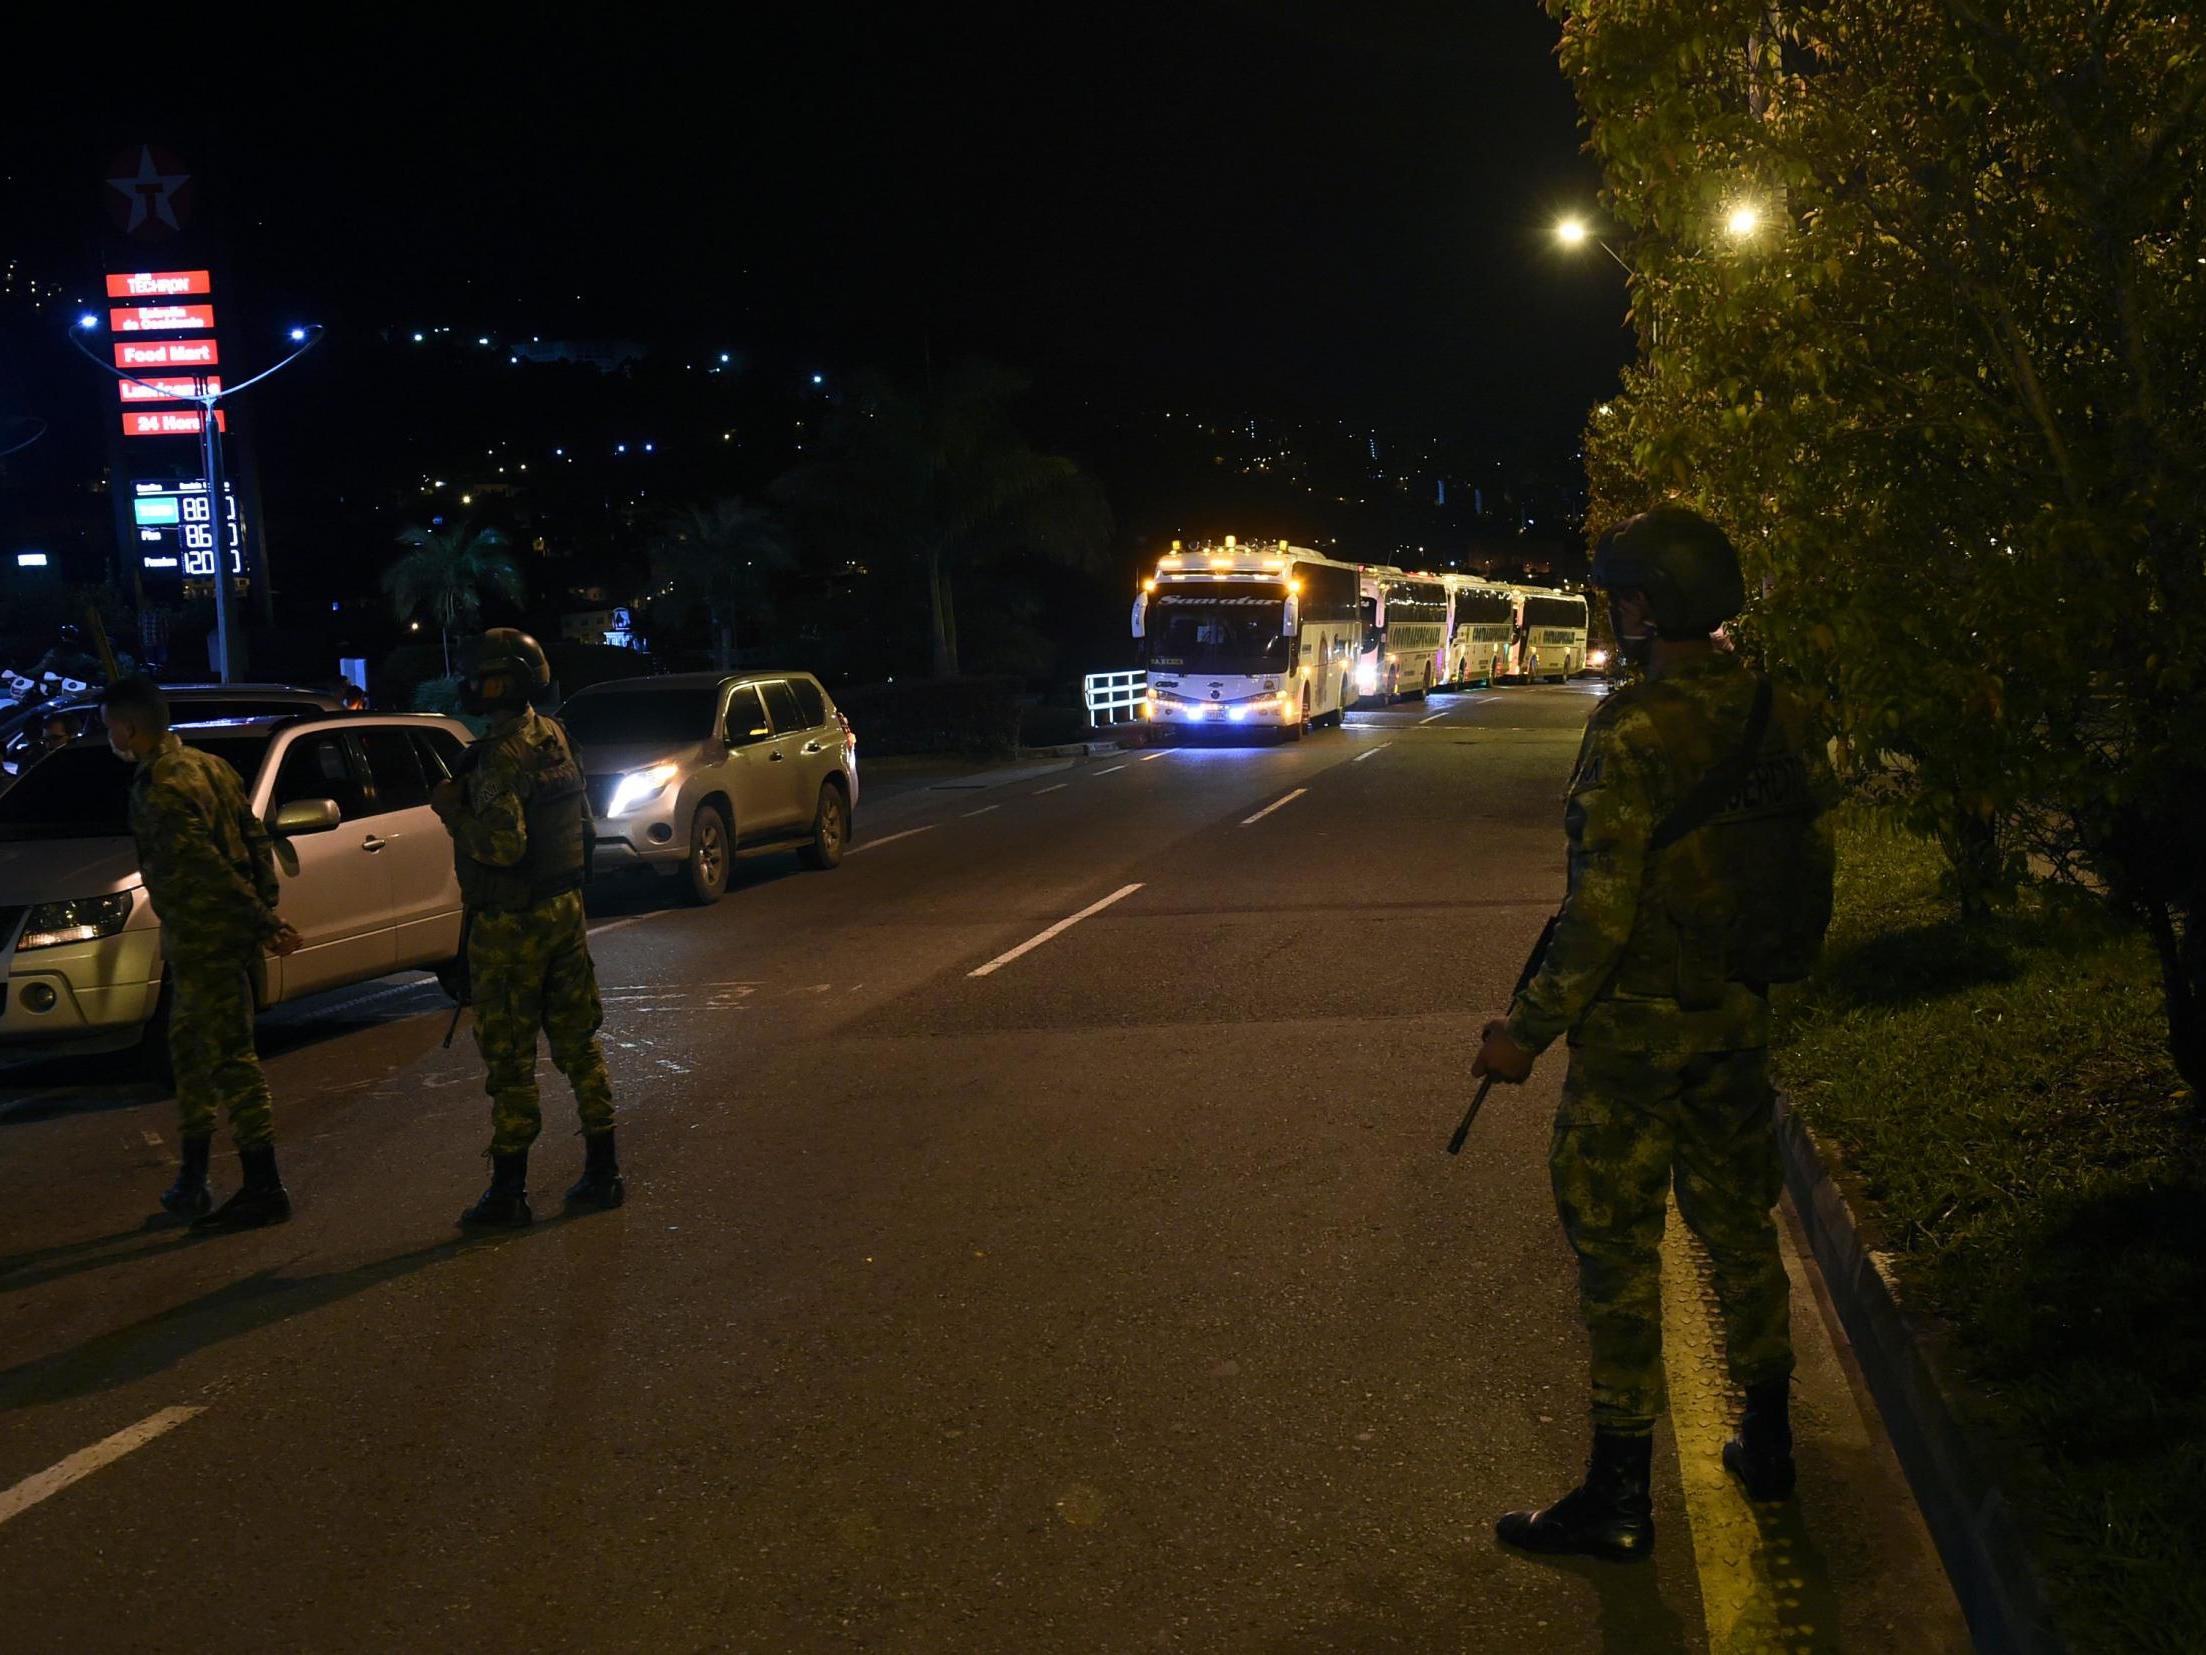 Colombians soldiers stand guard as the caravan carrying former FARC guerillas stopped at a gas station while heading to Mutata, Antioquia department, Colombia